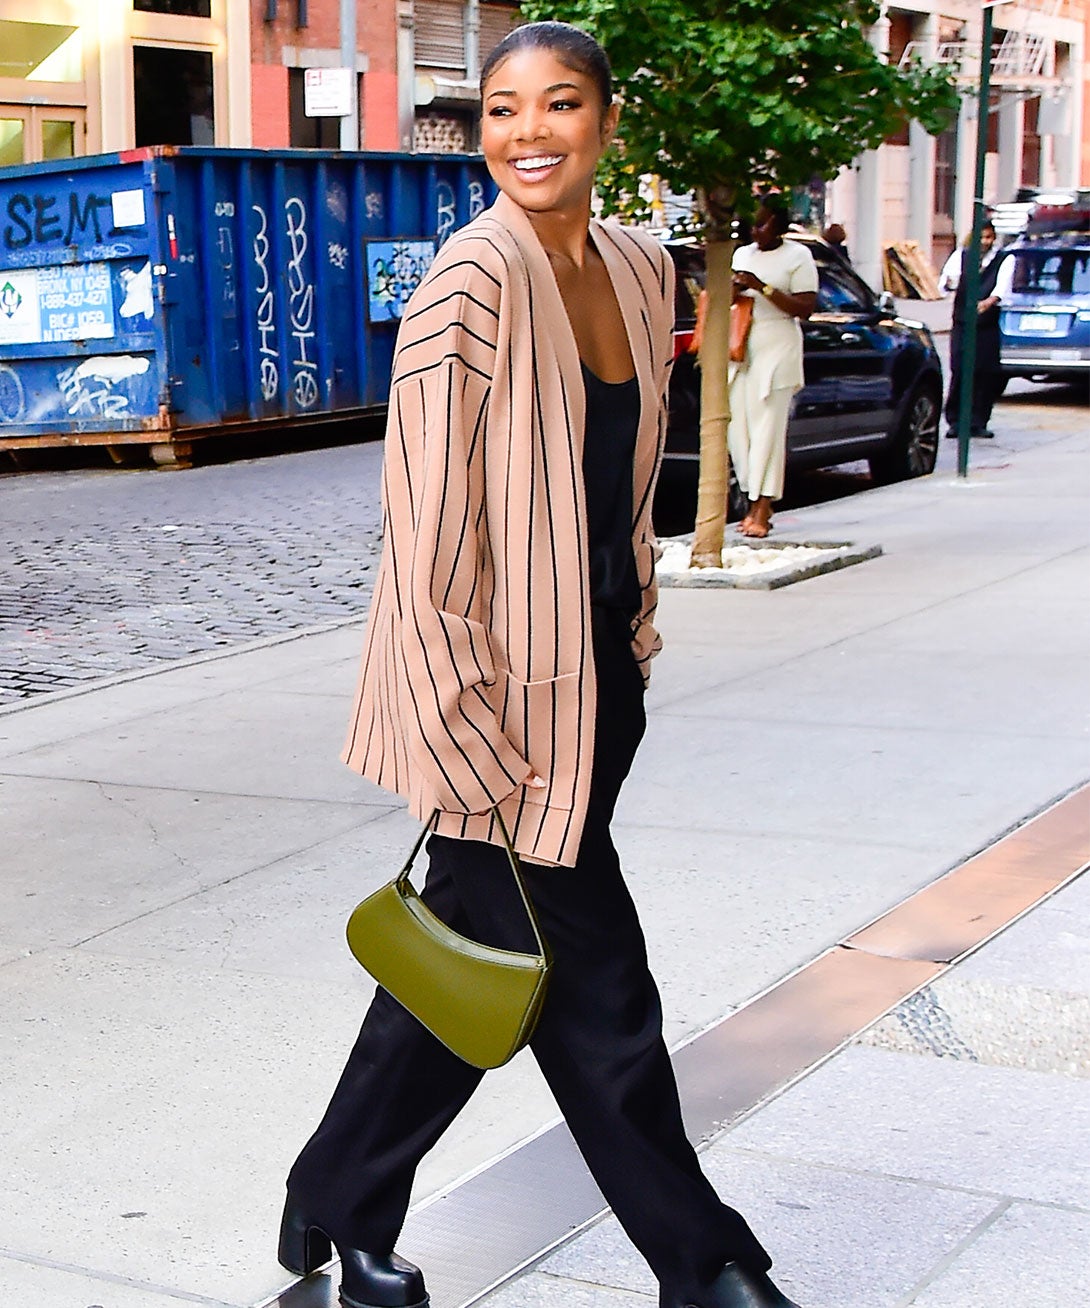 Celebs Are Loving This Under-The-Radar Handbag Brand & We Want In